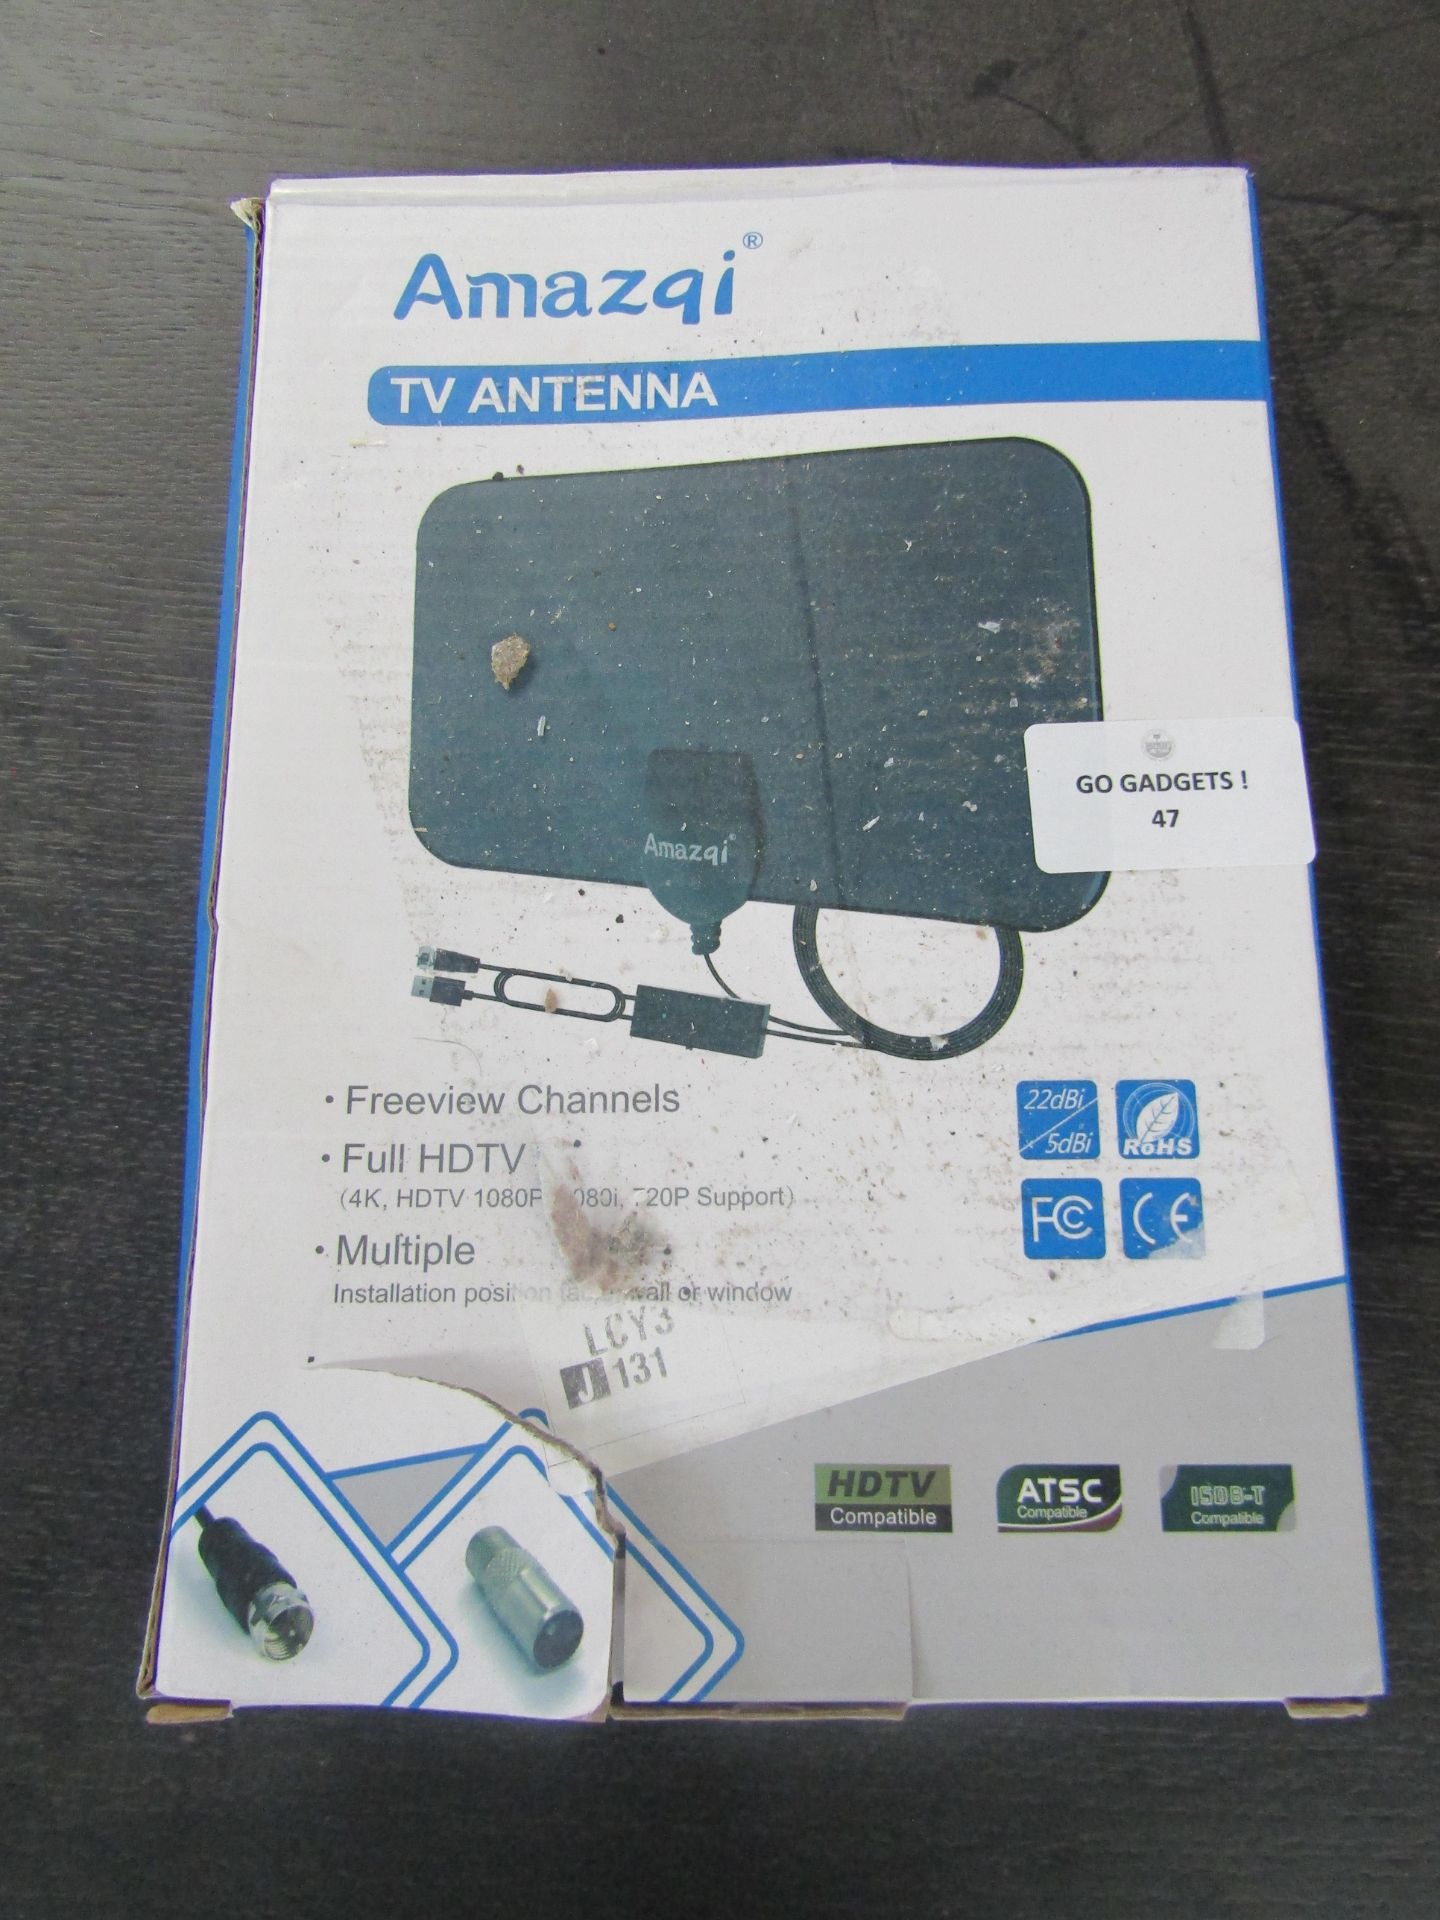 Amazqi HDTV 1080P TV Antenna, Freeview Channels - Unchecked & Boxed.